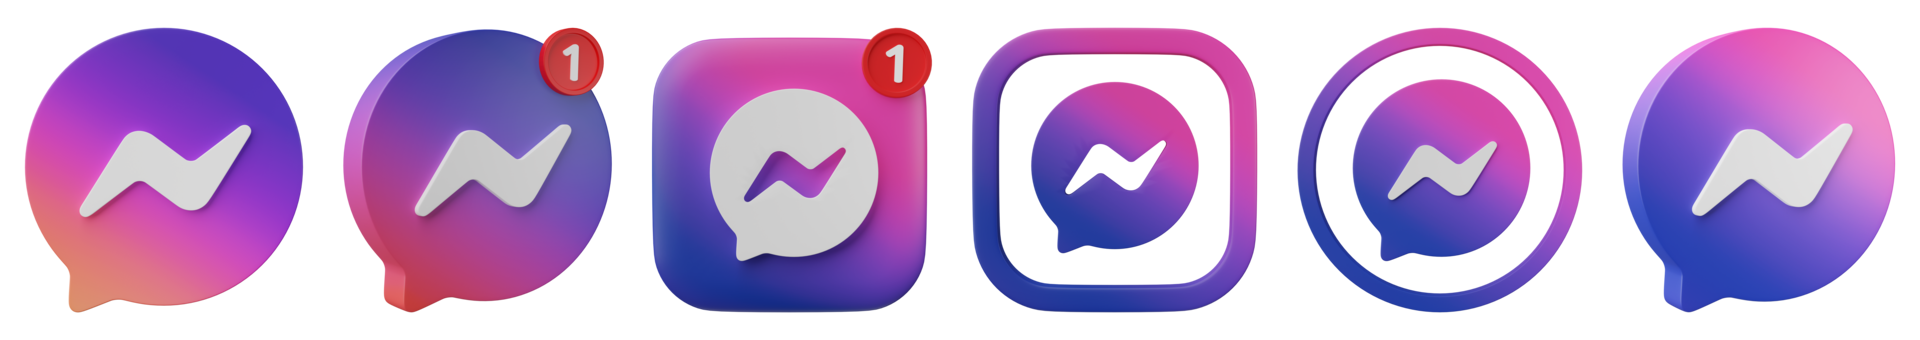 3D render, Set of Meta chat messenger, Facebook messenger gradient pink blue icon bubble isolated on transparent background. png